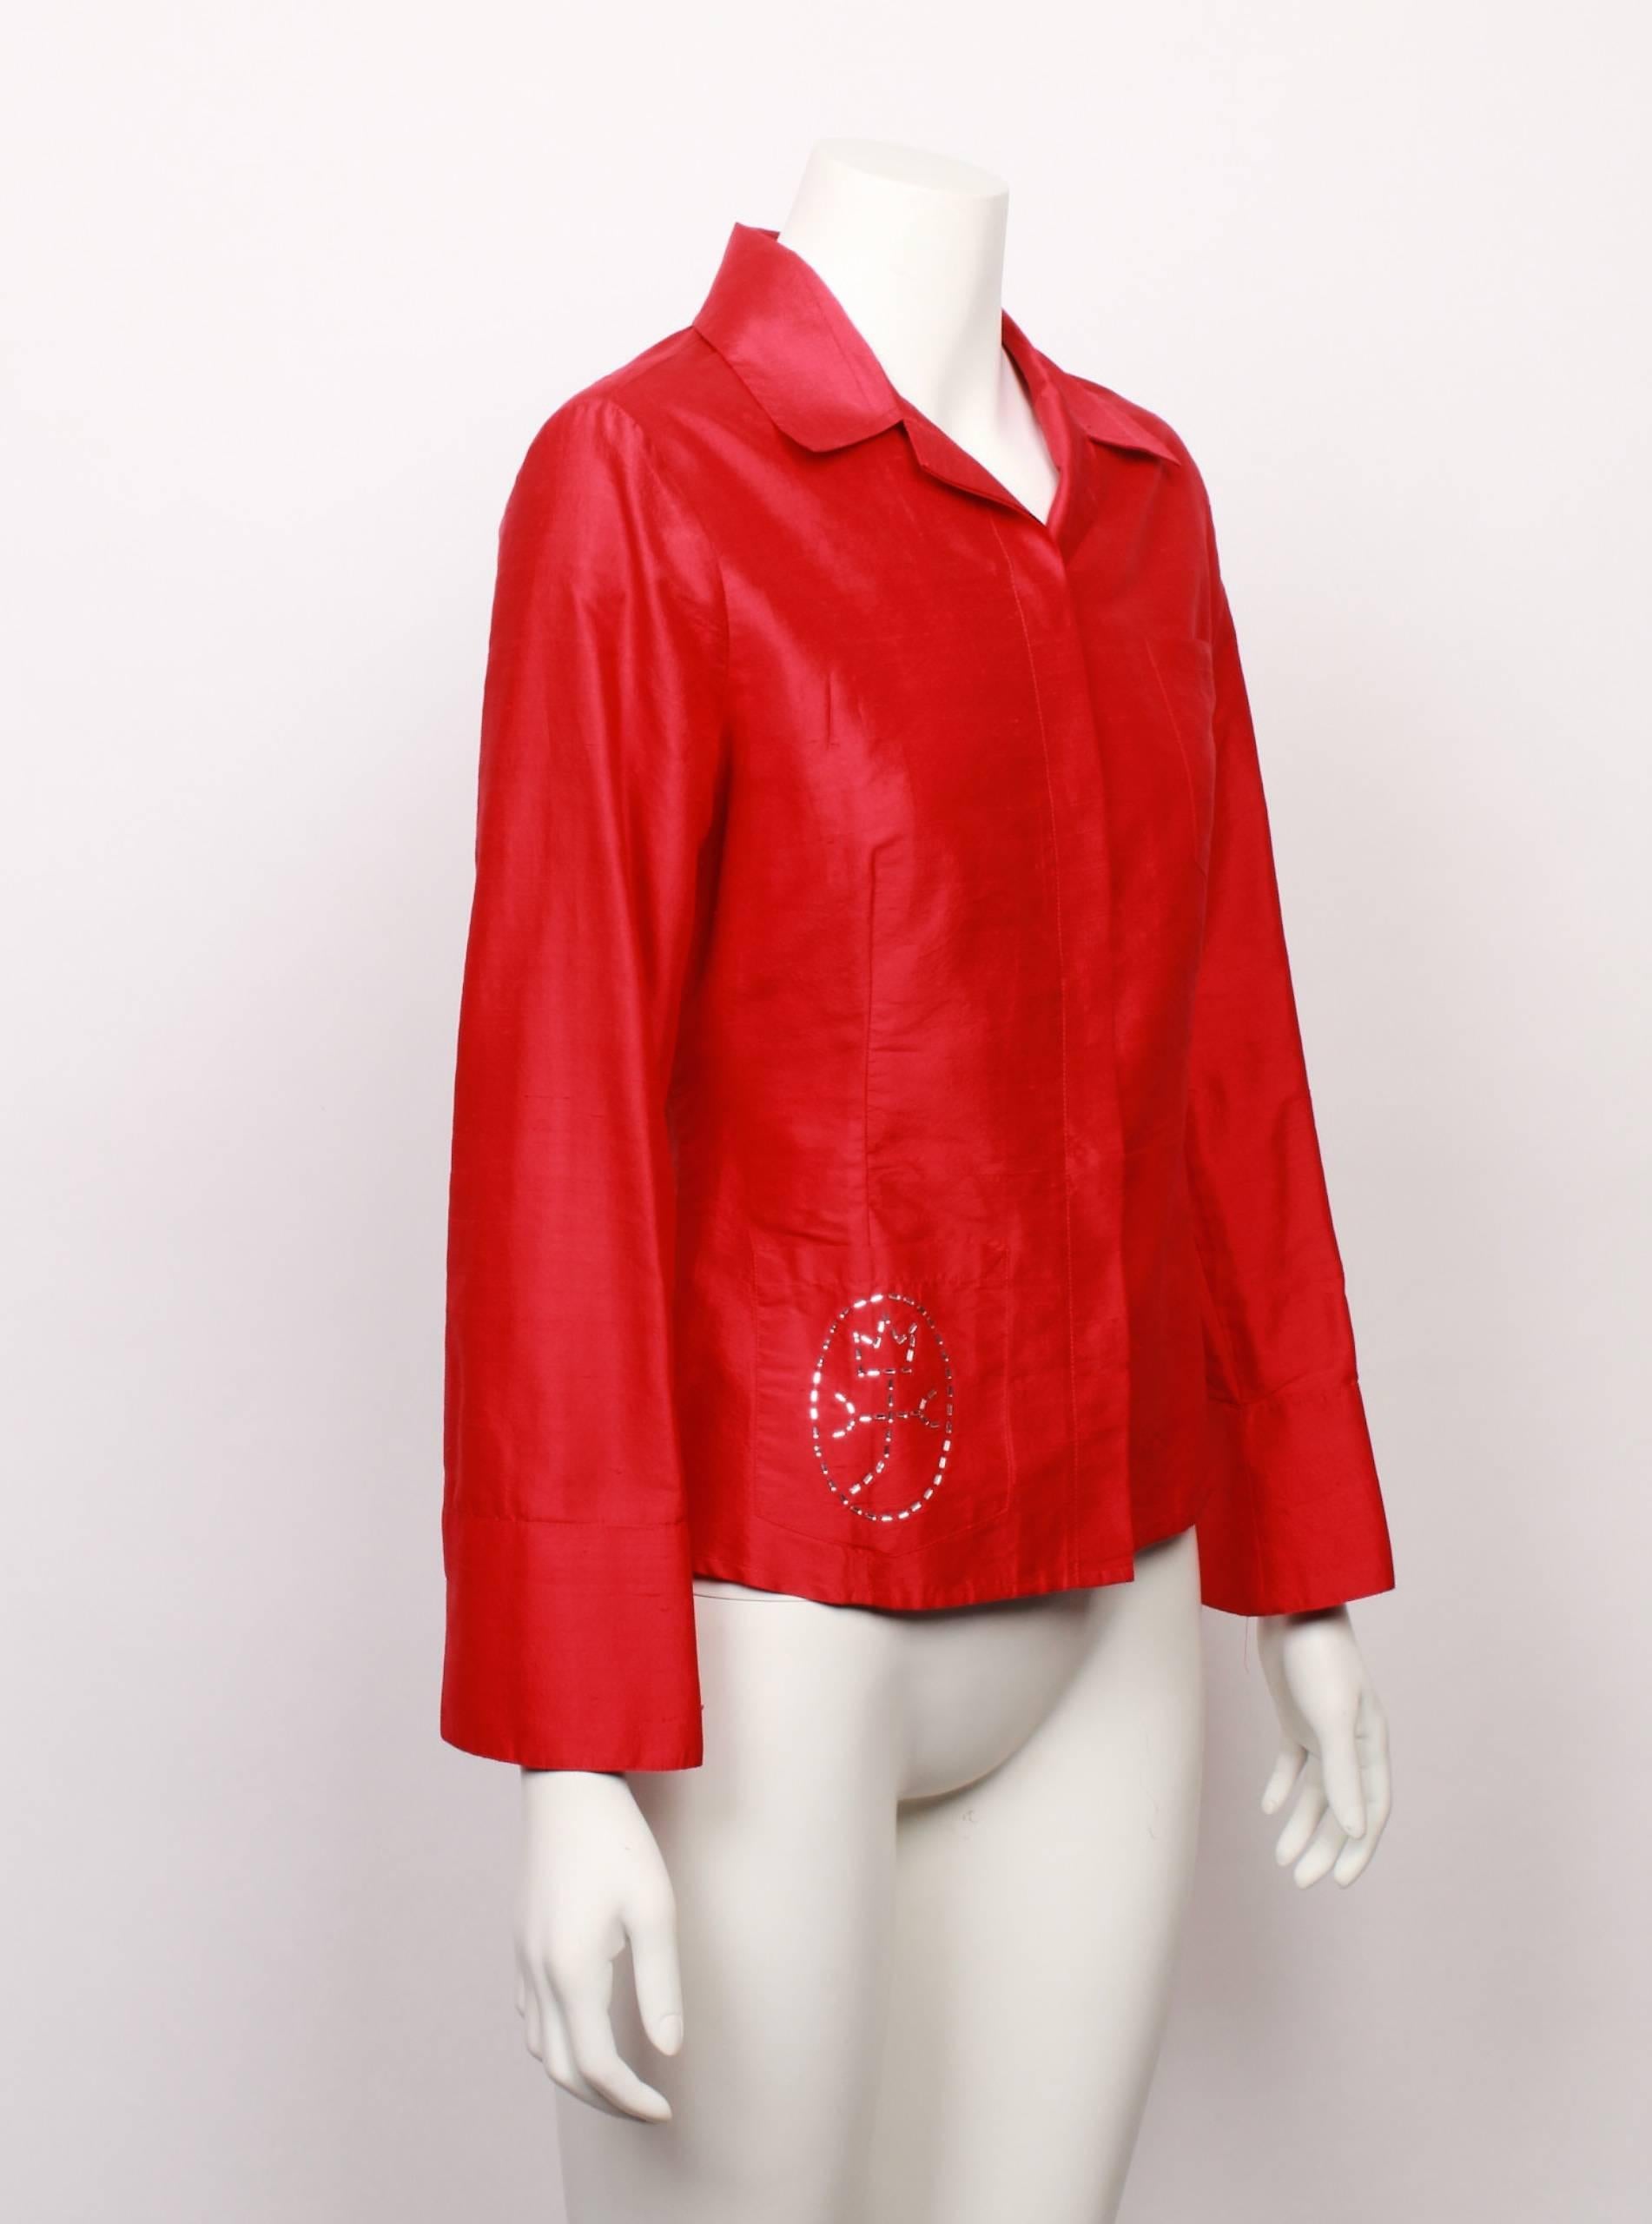 Castelbajac red silk dupion shirt with rhinestone floral feature. The shirt has a concealed button placket, cuffs with split detail , turn back flat collar and a breast pocket. 